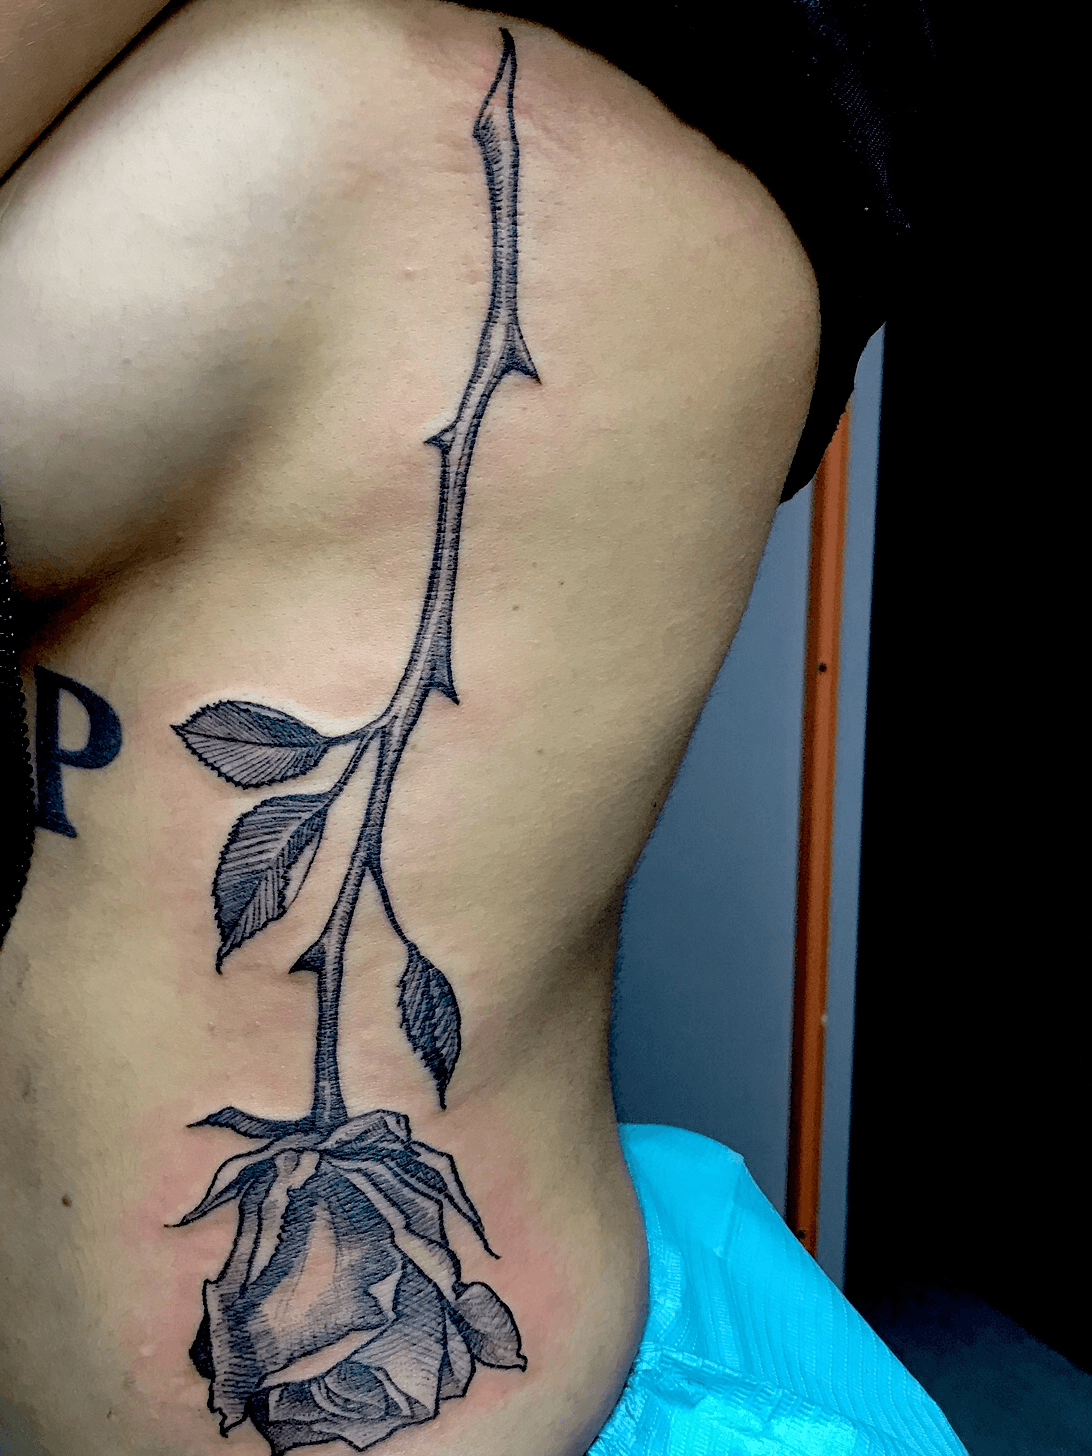 Tattoo uploaded by Alice Totemica  black dead roses tattoo blackwork  totemica ontheroad  Tattoodo